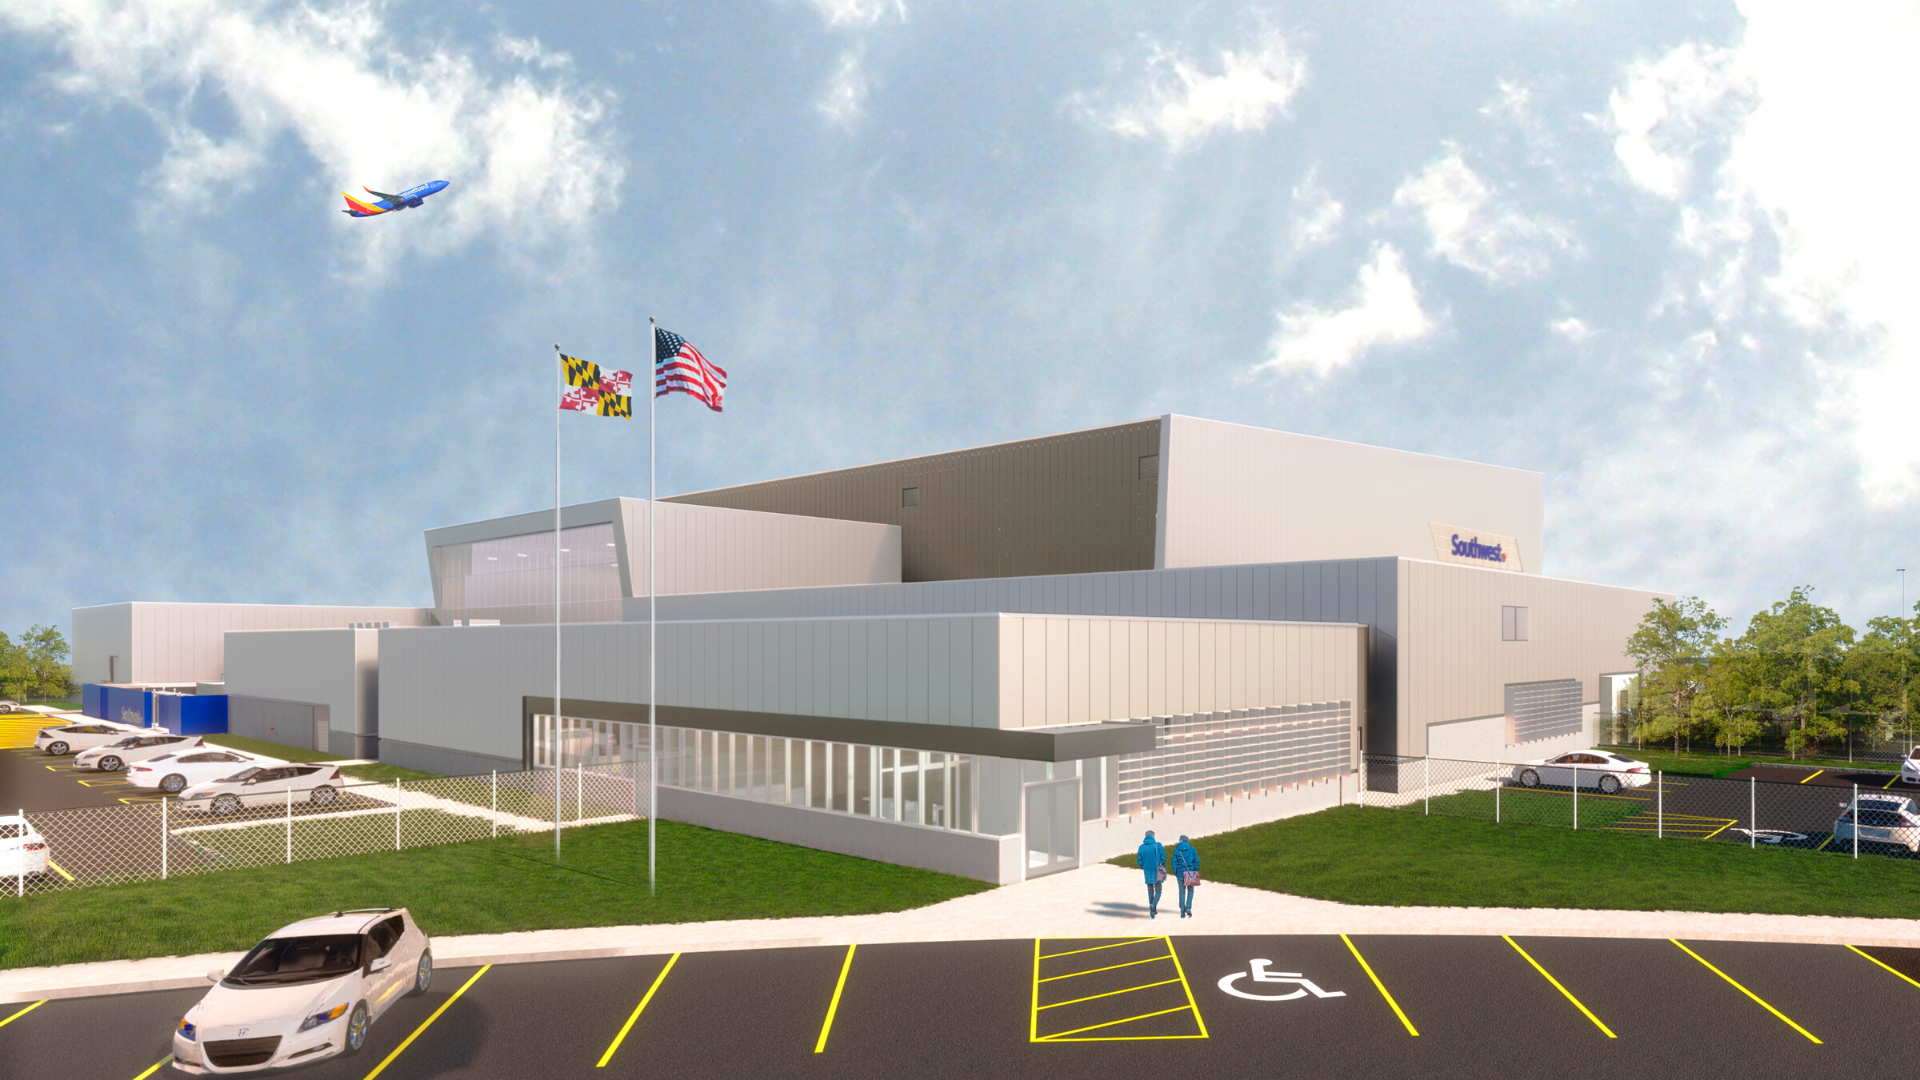 Graphic showing the exterior and parking area of a planned Southwest Airlines aircraft maintenance facility at BWI Marshall Airport